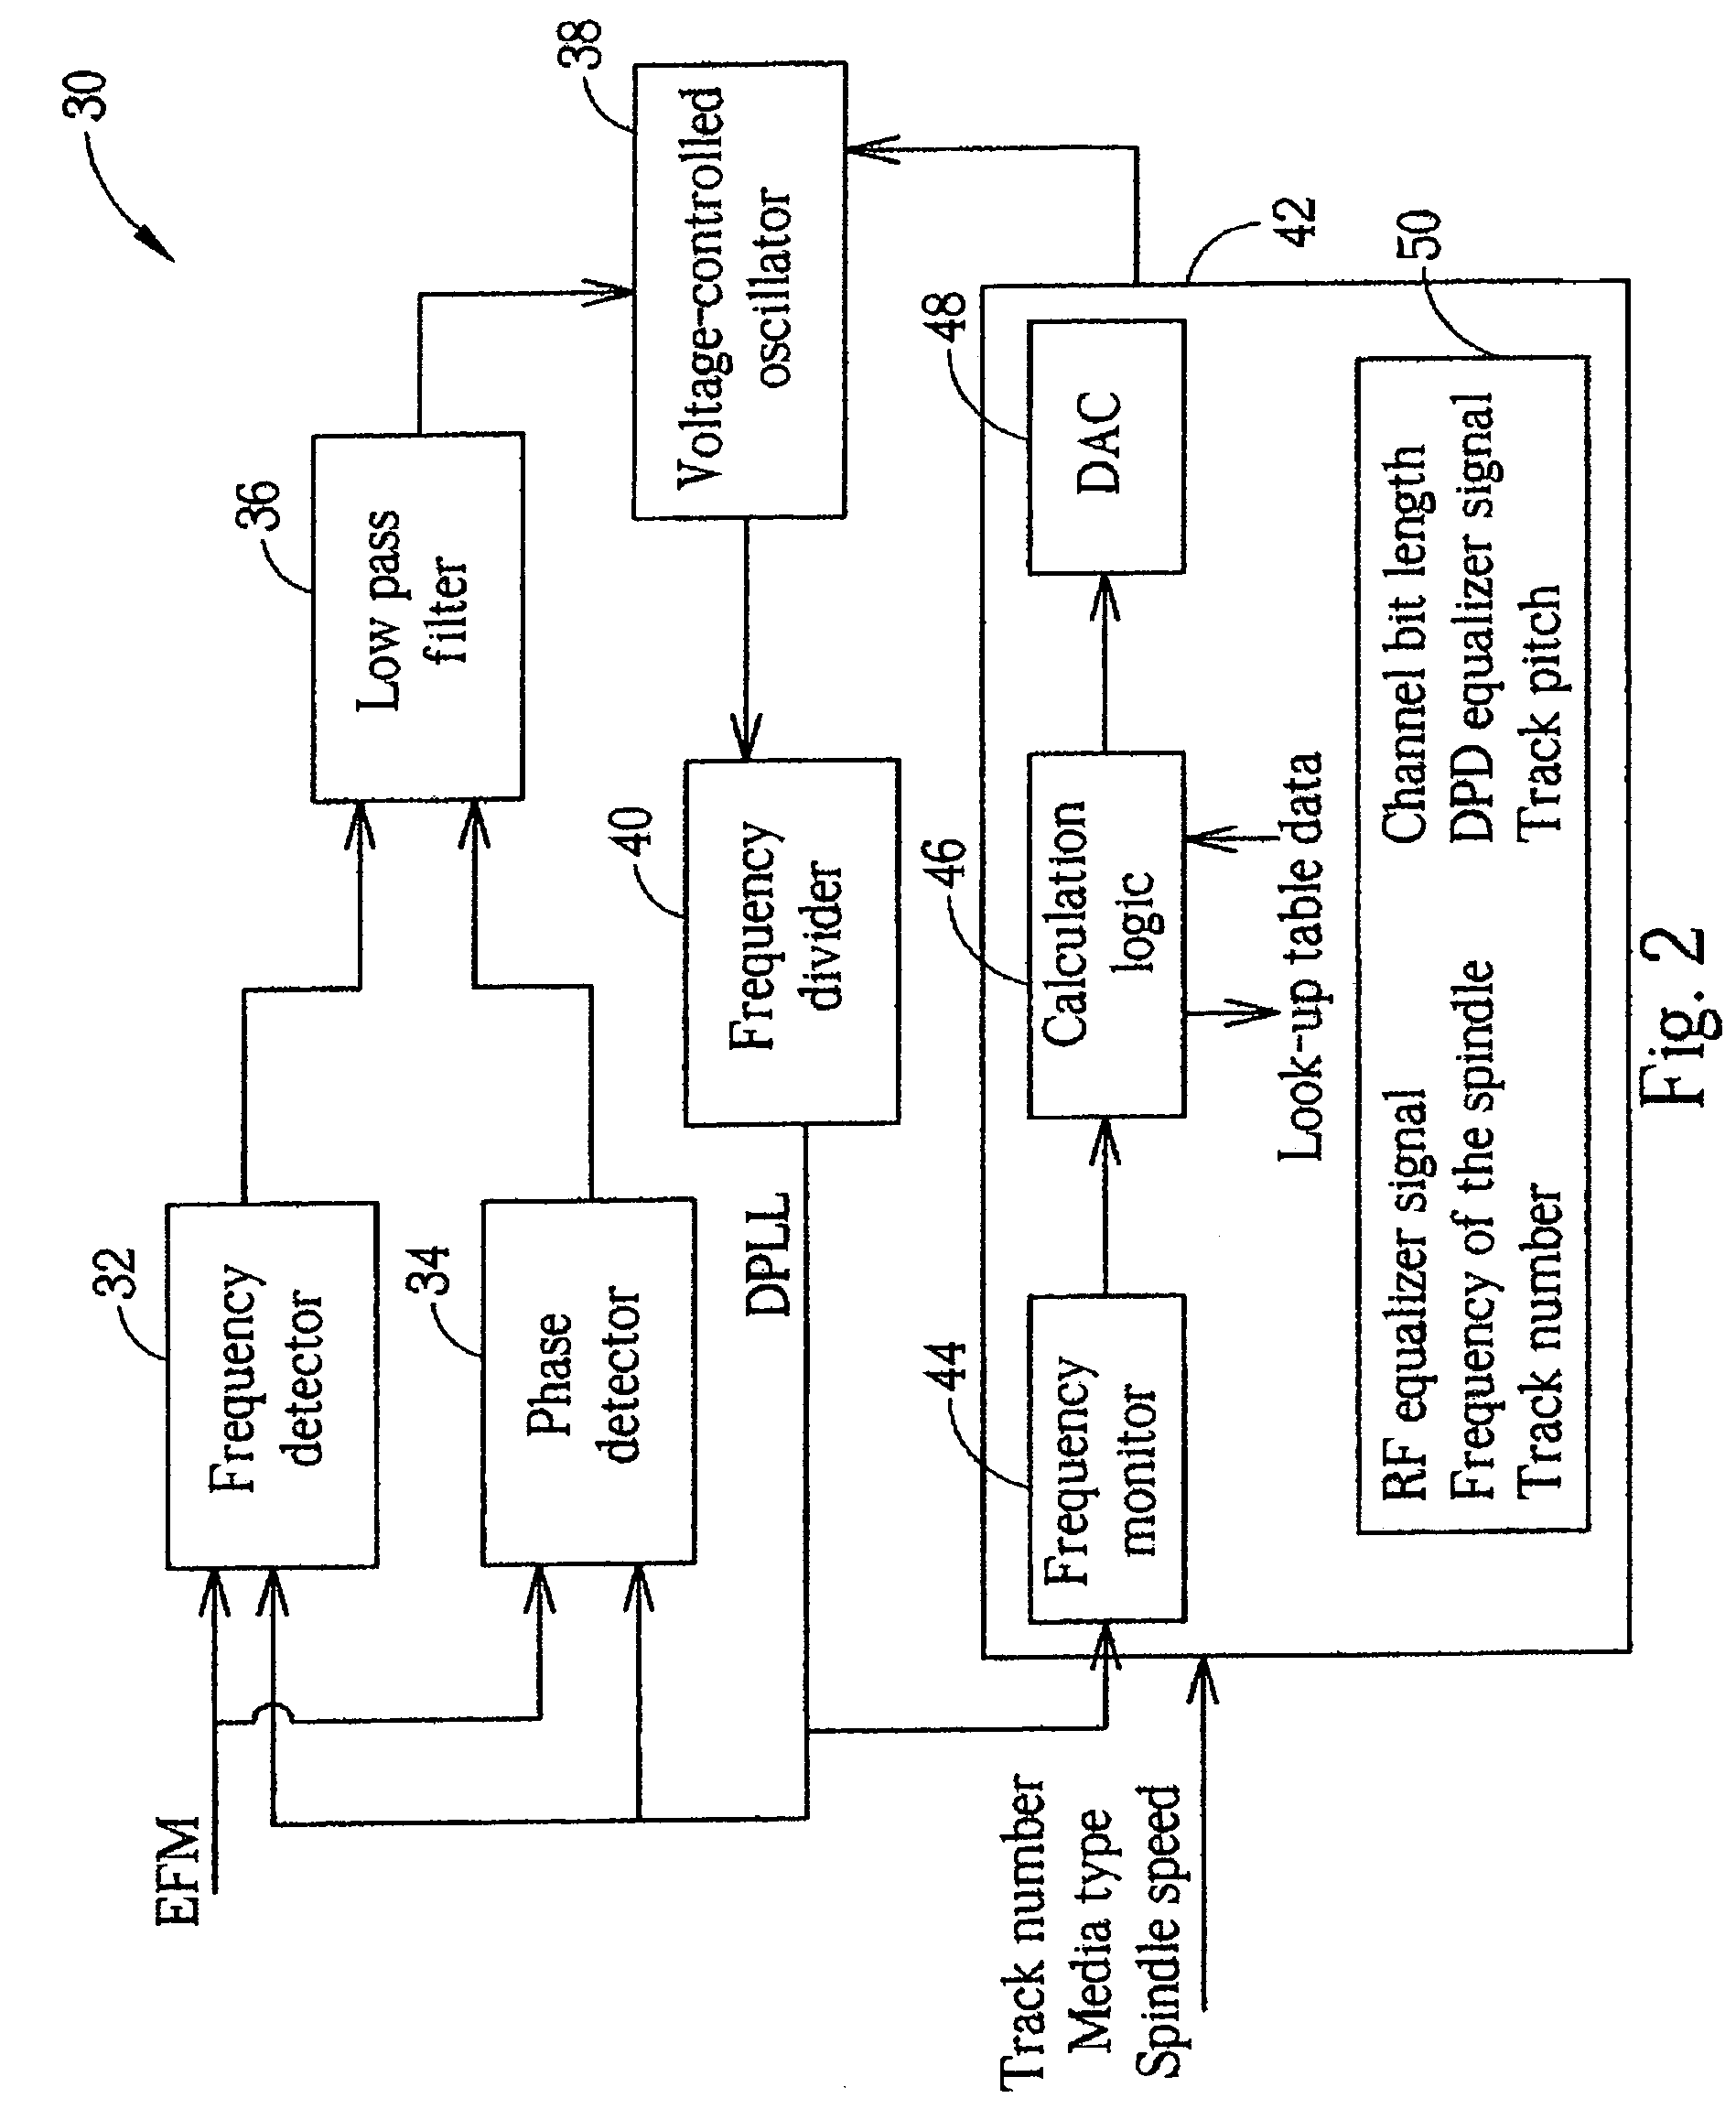 Method of controlling an optical disk drive by calculating a target frequency of a DPLL signal